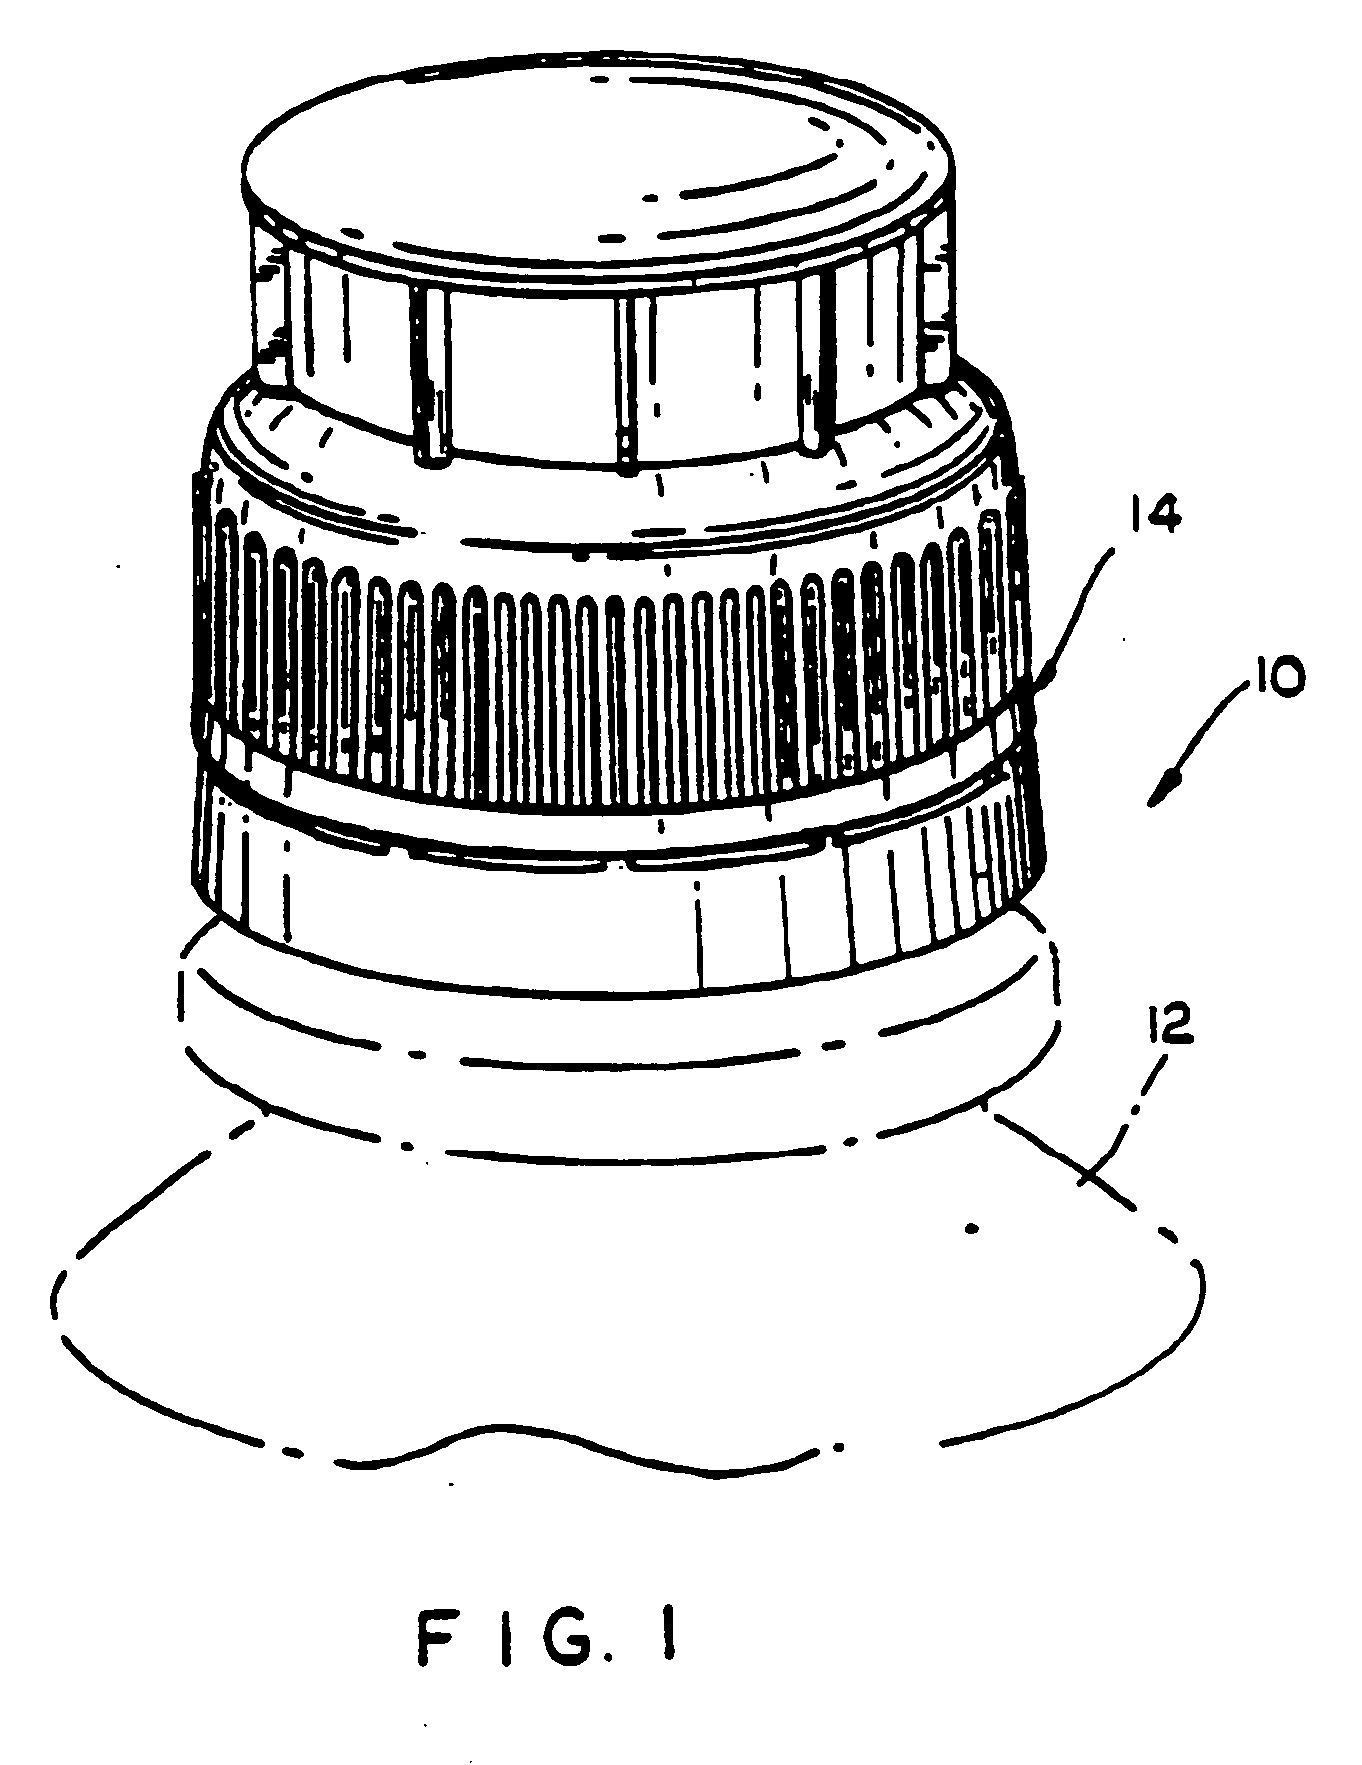 Cover for dispensing closure with pressure actuated valve